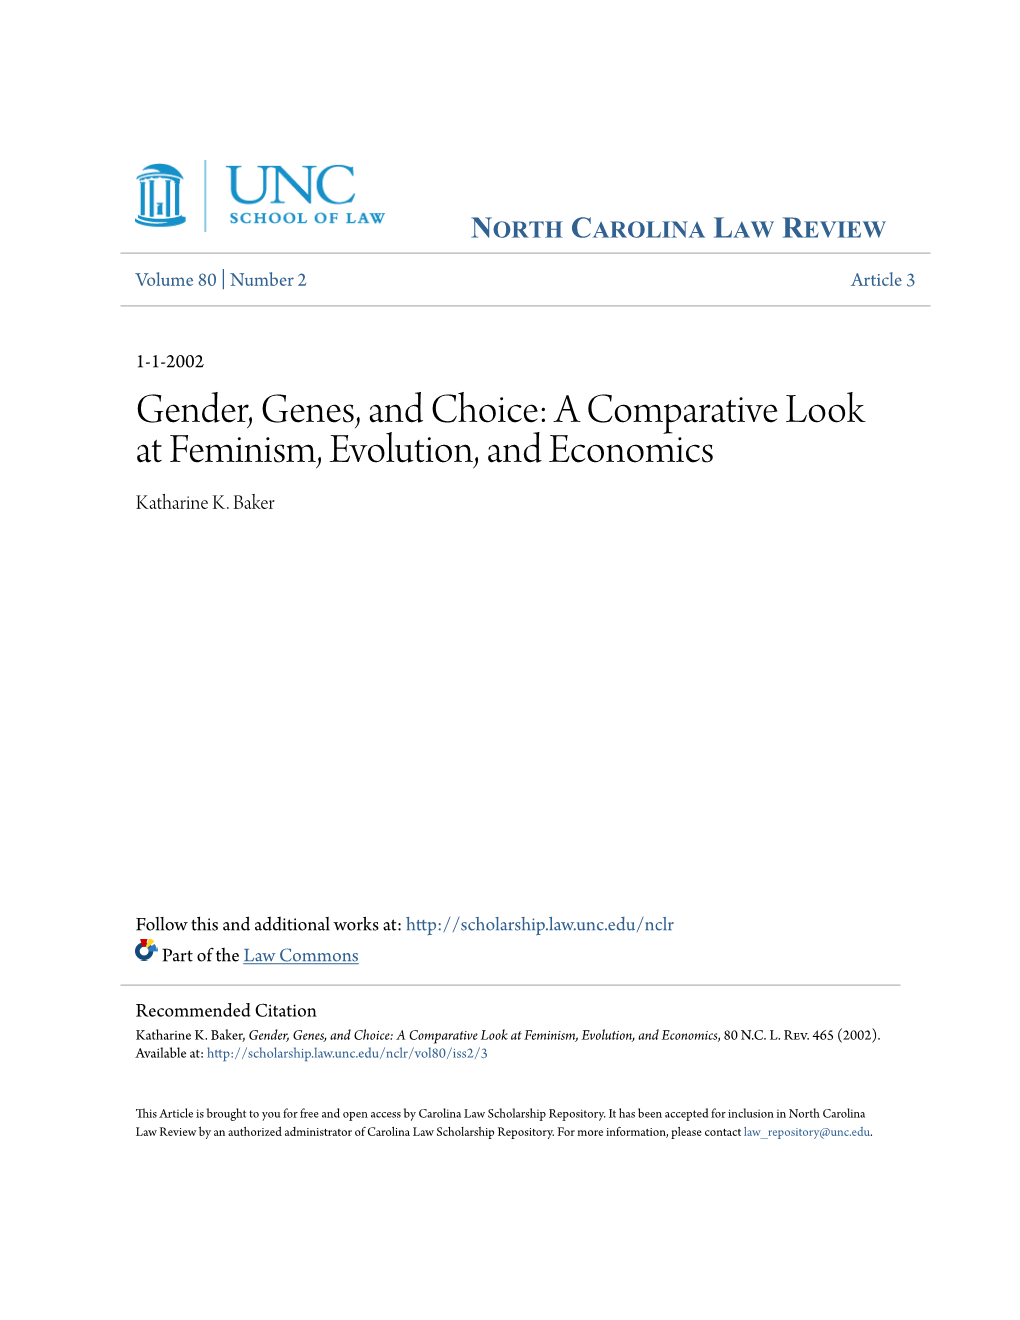 Gender, Genes, and Choice: a Comparative Look at Feminism, Evolution, and Economics Katharine K